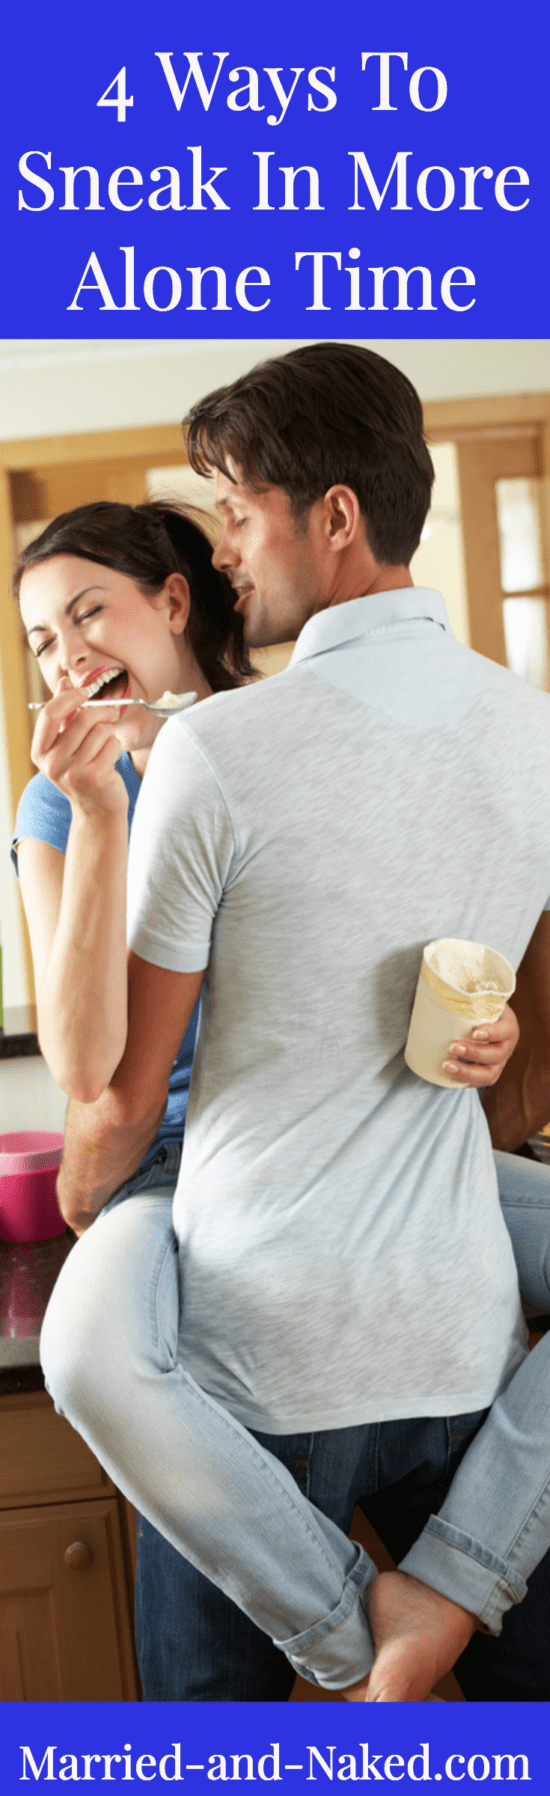 4 ways to sneak in more alone time with your spouse